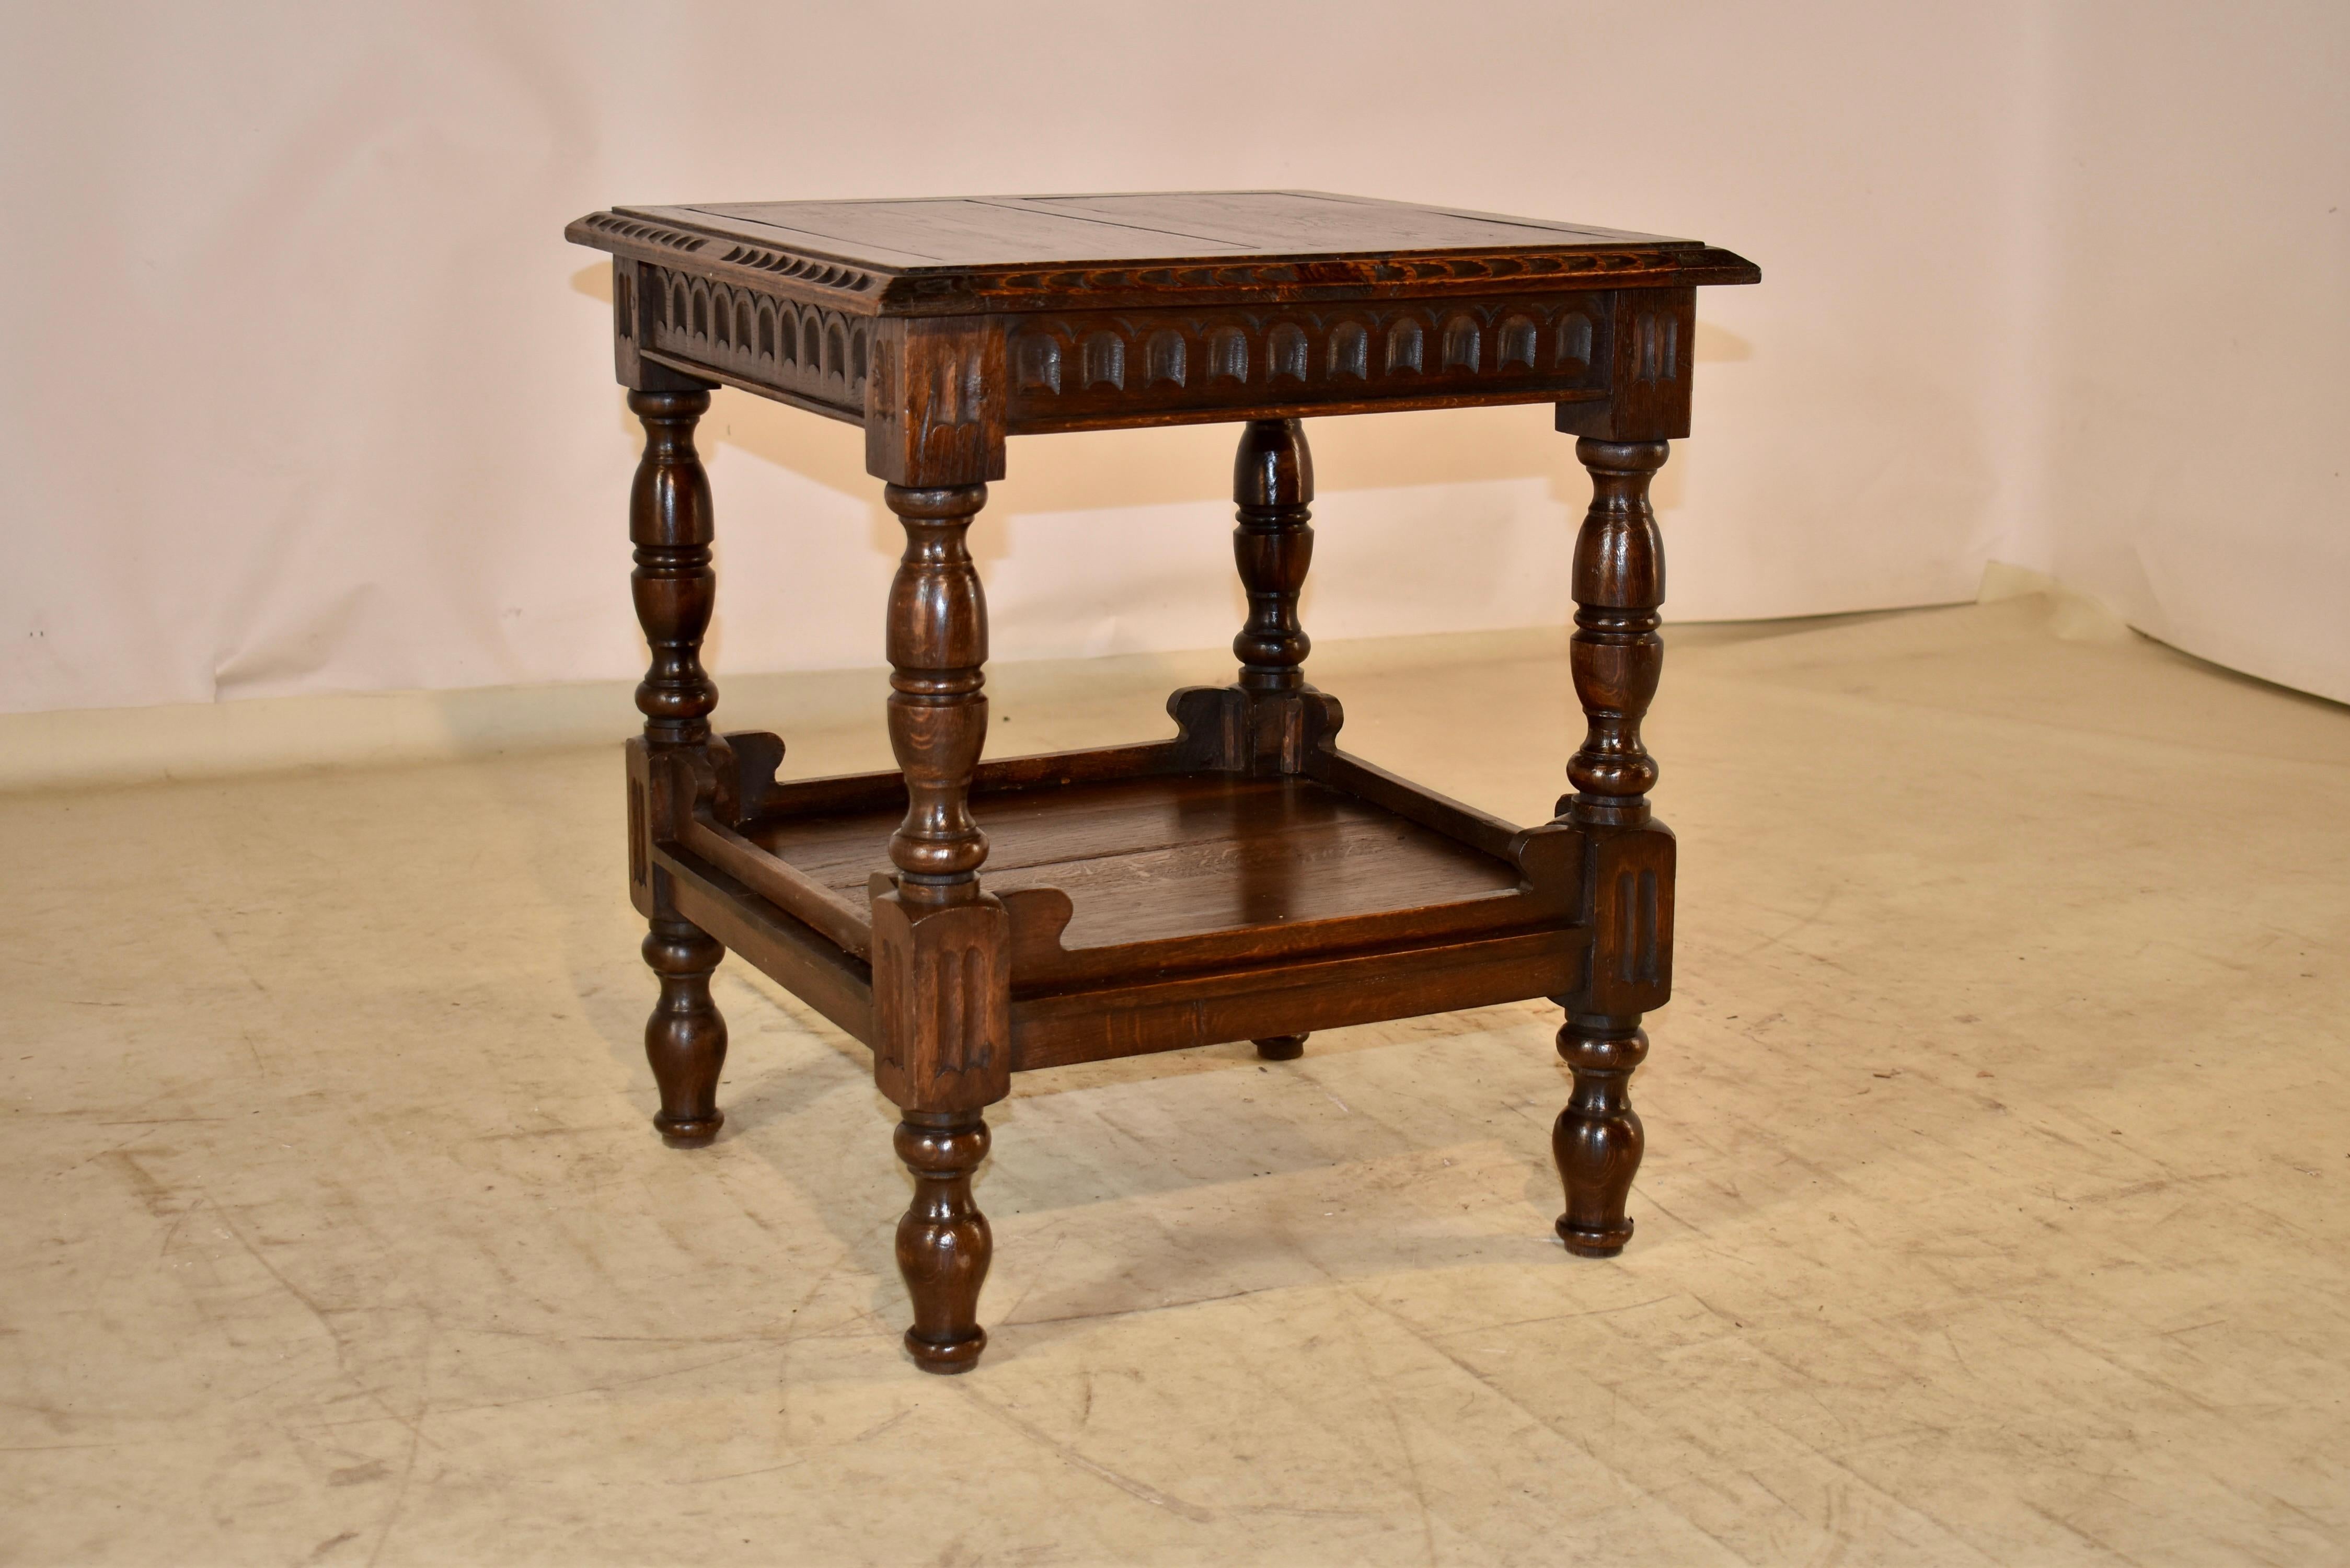 19th century oak side table from England with a paneled top, which features carved and beveled edges, following down to a hand carved apron in a nulled pattern. The table is supported on hand turned legs which are joined by a lower shelf. the lower